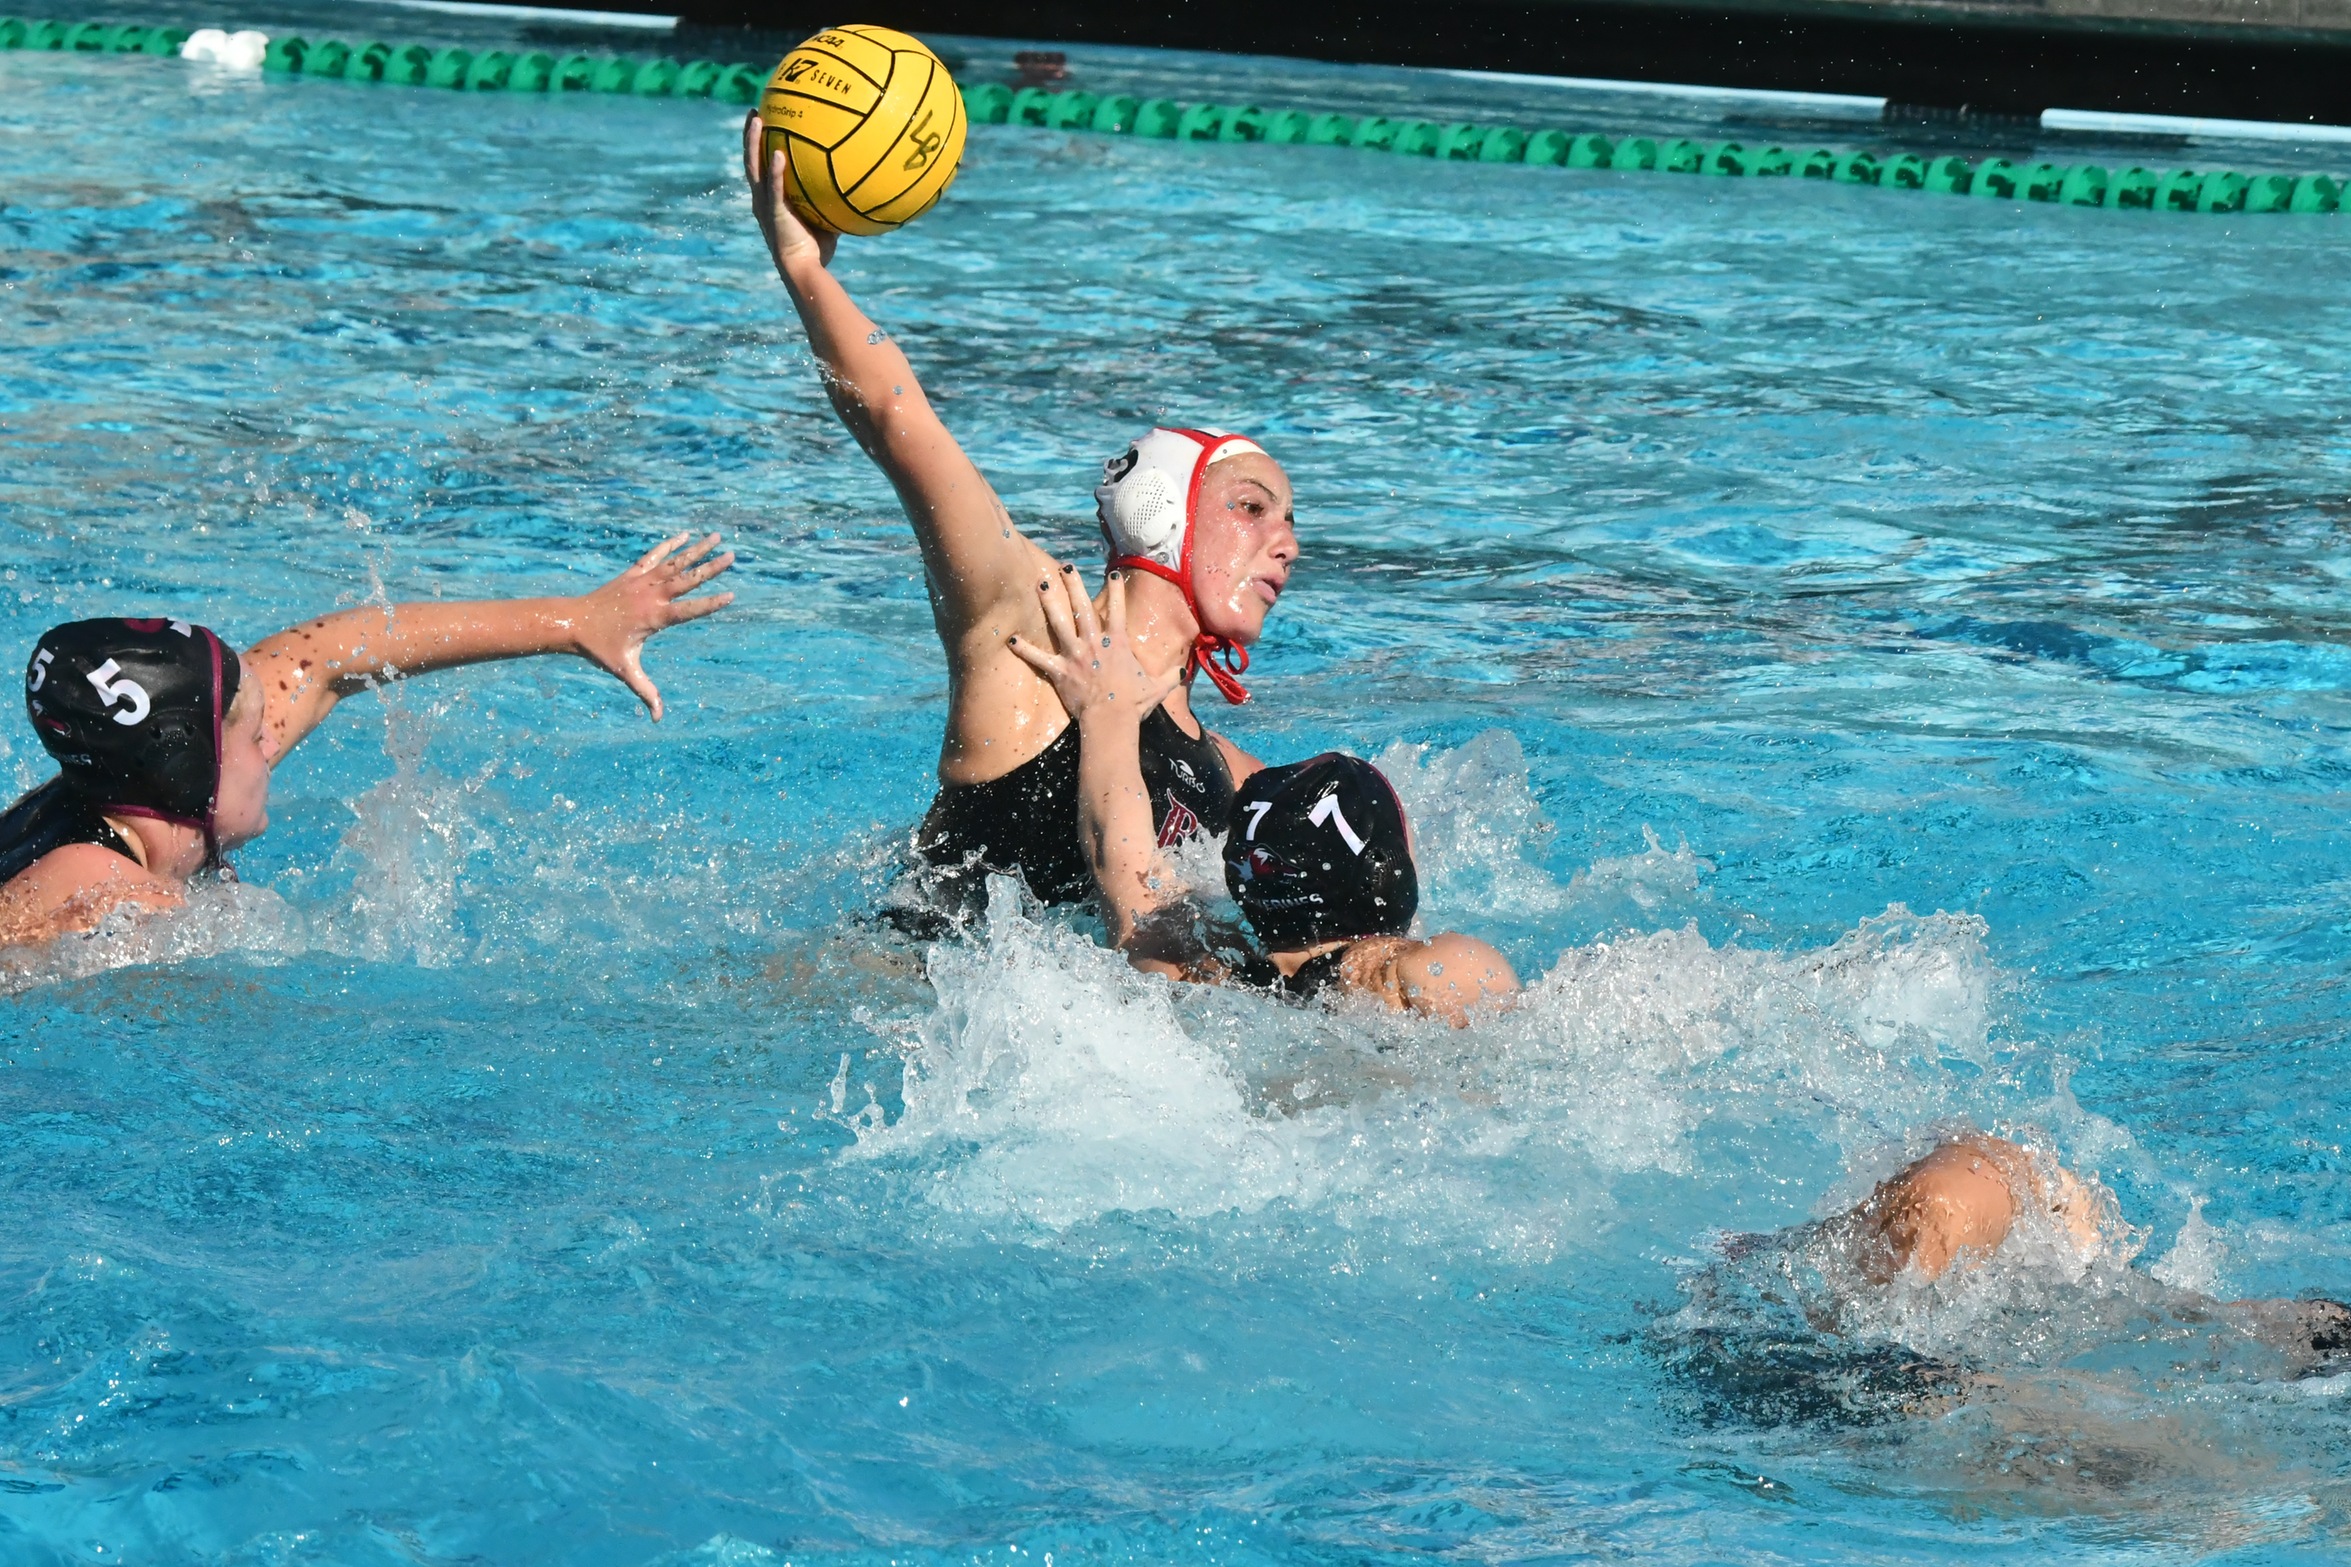 Long Beach Rule Of SCC Women's Water Polo Continues, 8 Consecutive Titles